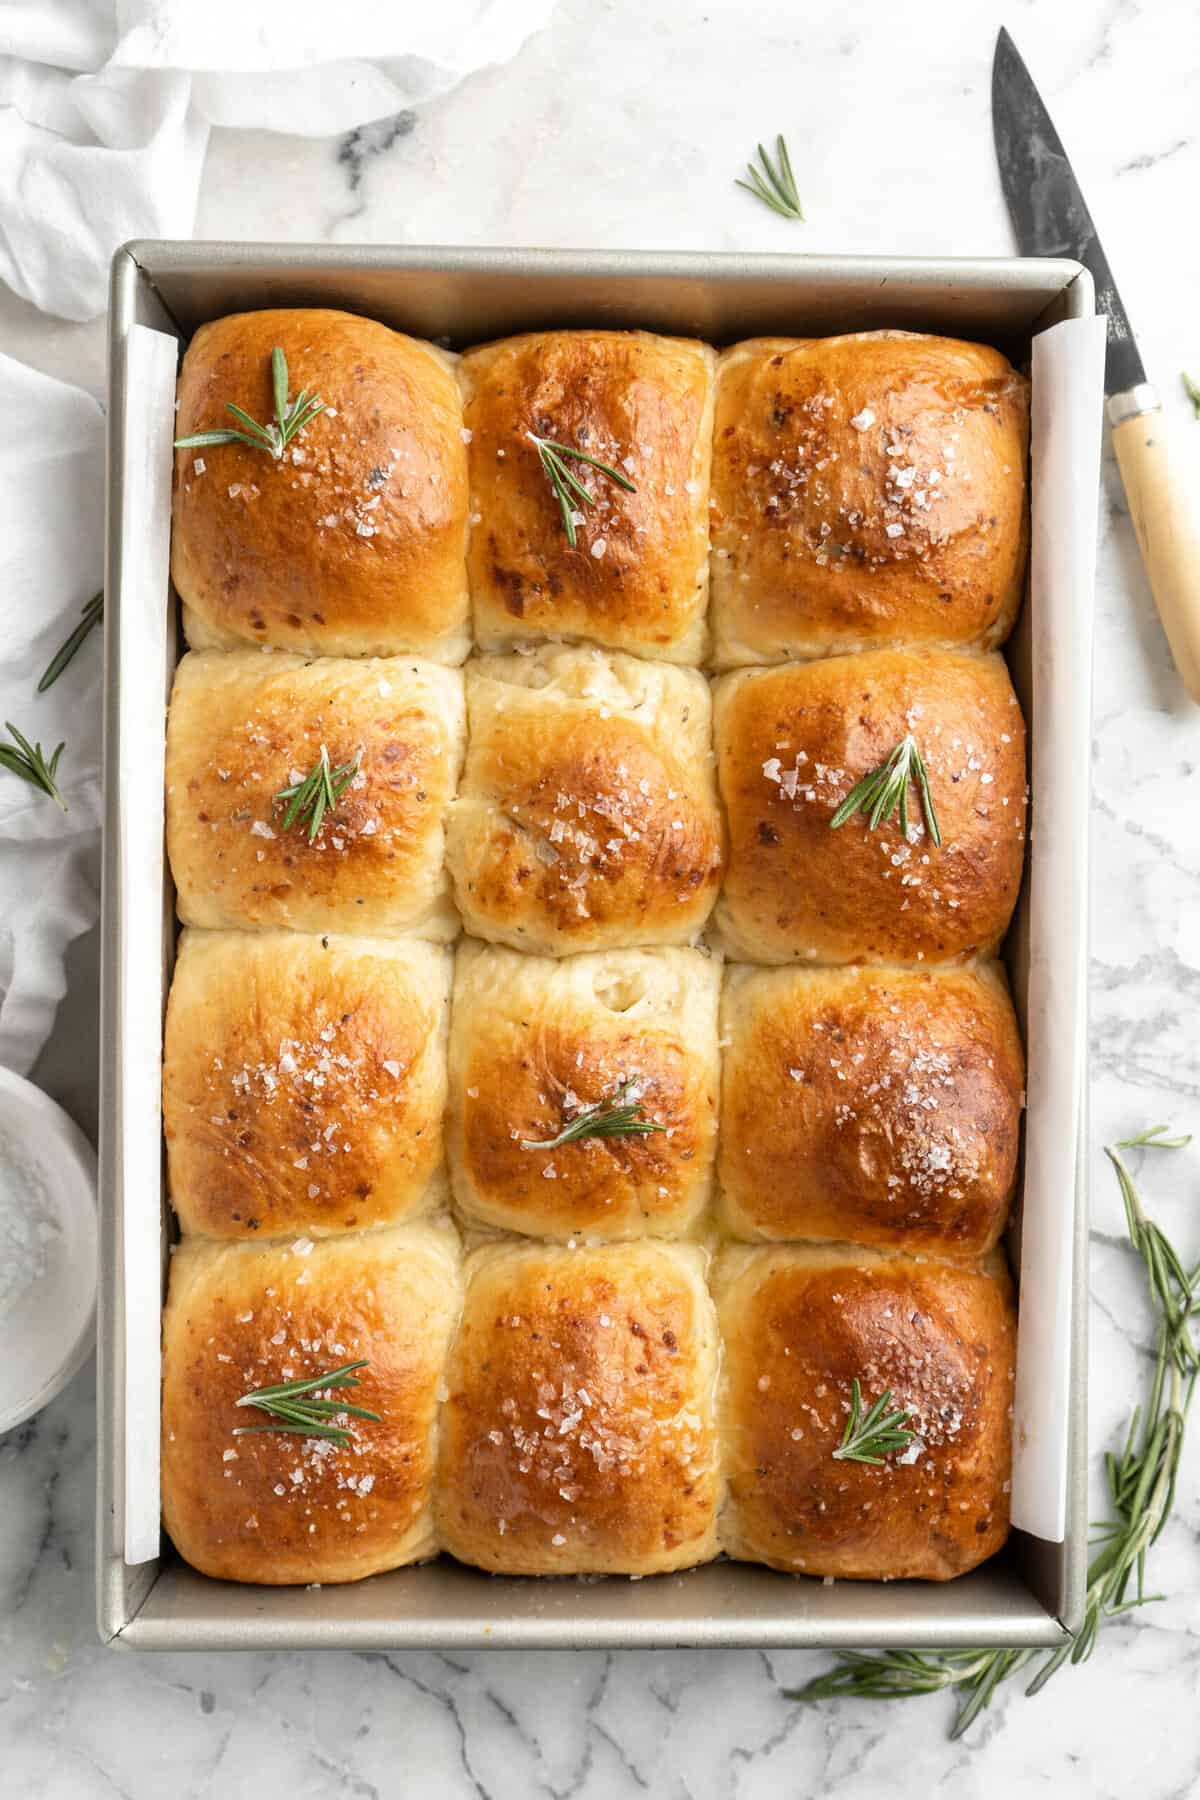 Homemade rosemary cheddar rolls in a rectangle baking pan.